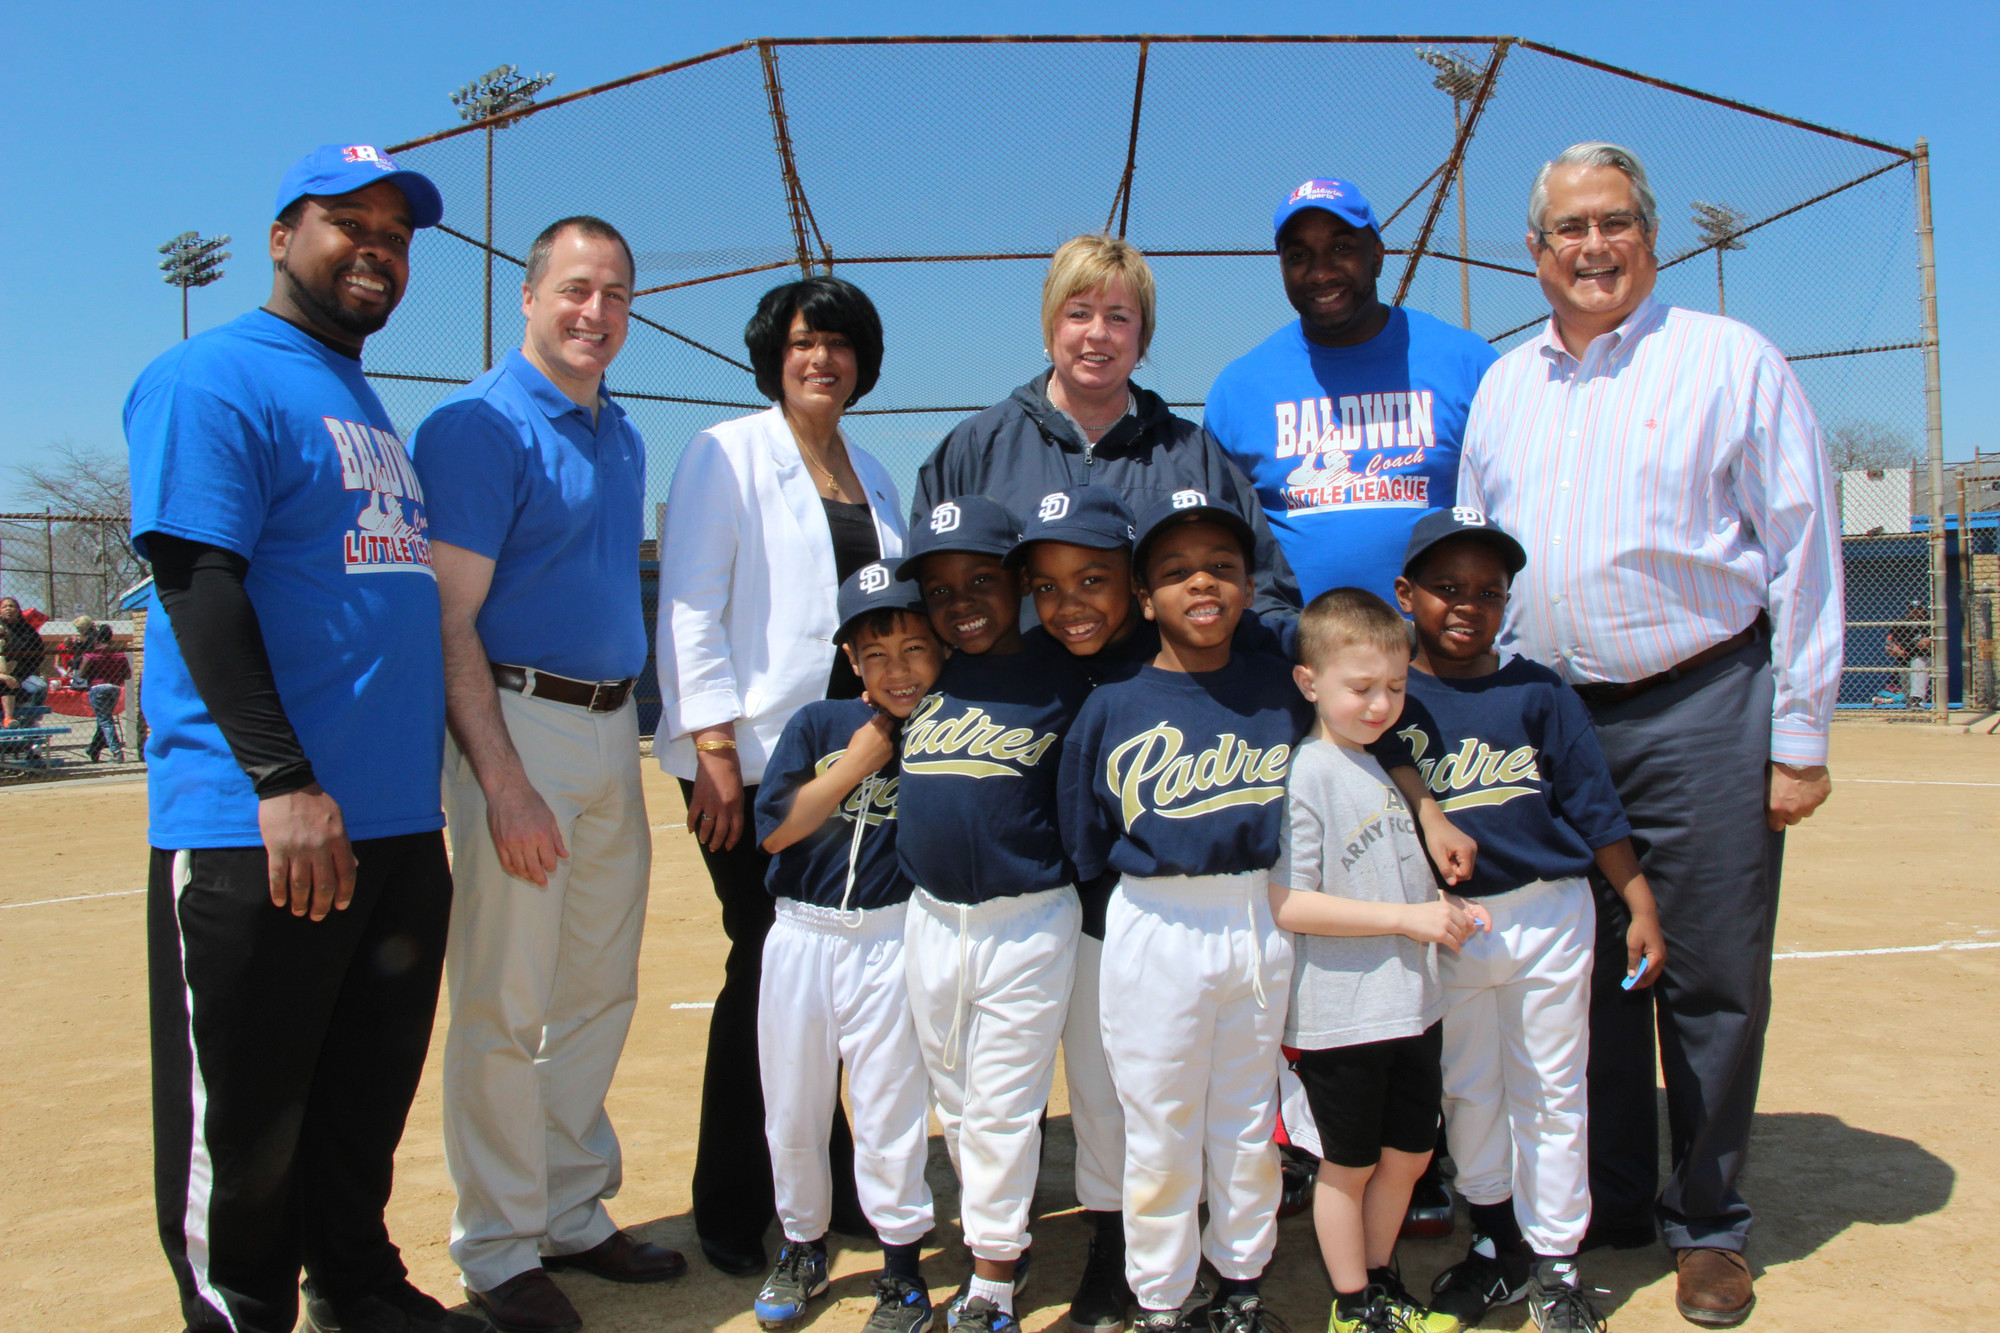 Baldwin Little League held its annual Opening Day cermonies on May 3 at Baldwin Park and it was quite the success, with a large turnout and sunny skies. Pictured from the Padres, a team of 6 and 7 year olds, were, from left. Garri Williams Jr., Cameron Myles, Luke Freymann, Benjamin Addzi, Jordon Andreula and Jayden Johnson. The back row from left is coach Garris Williams,  Assemblyman Brian Curran, Town of Hempstead Clerk Nasrin Ahmad, Town of Hempstead Supervisor Kate Murray, coach Lateef Williams and Town of Hempstead Councilman Anthony Santino.